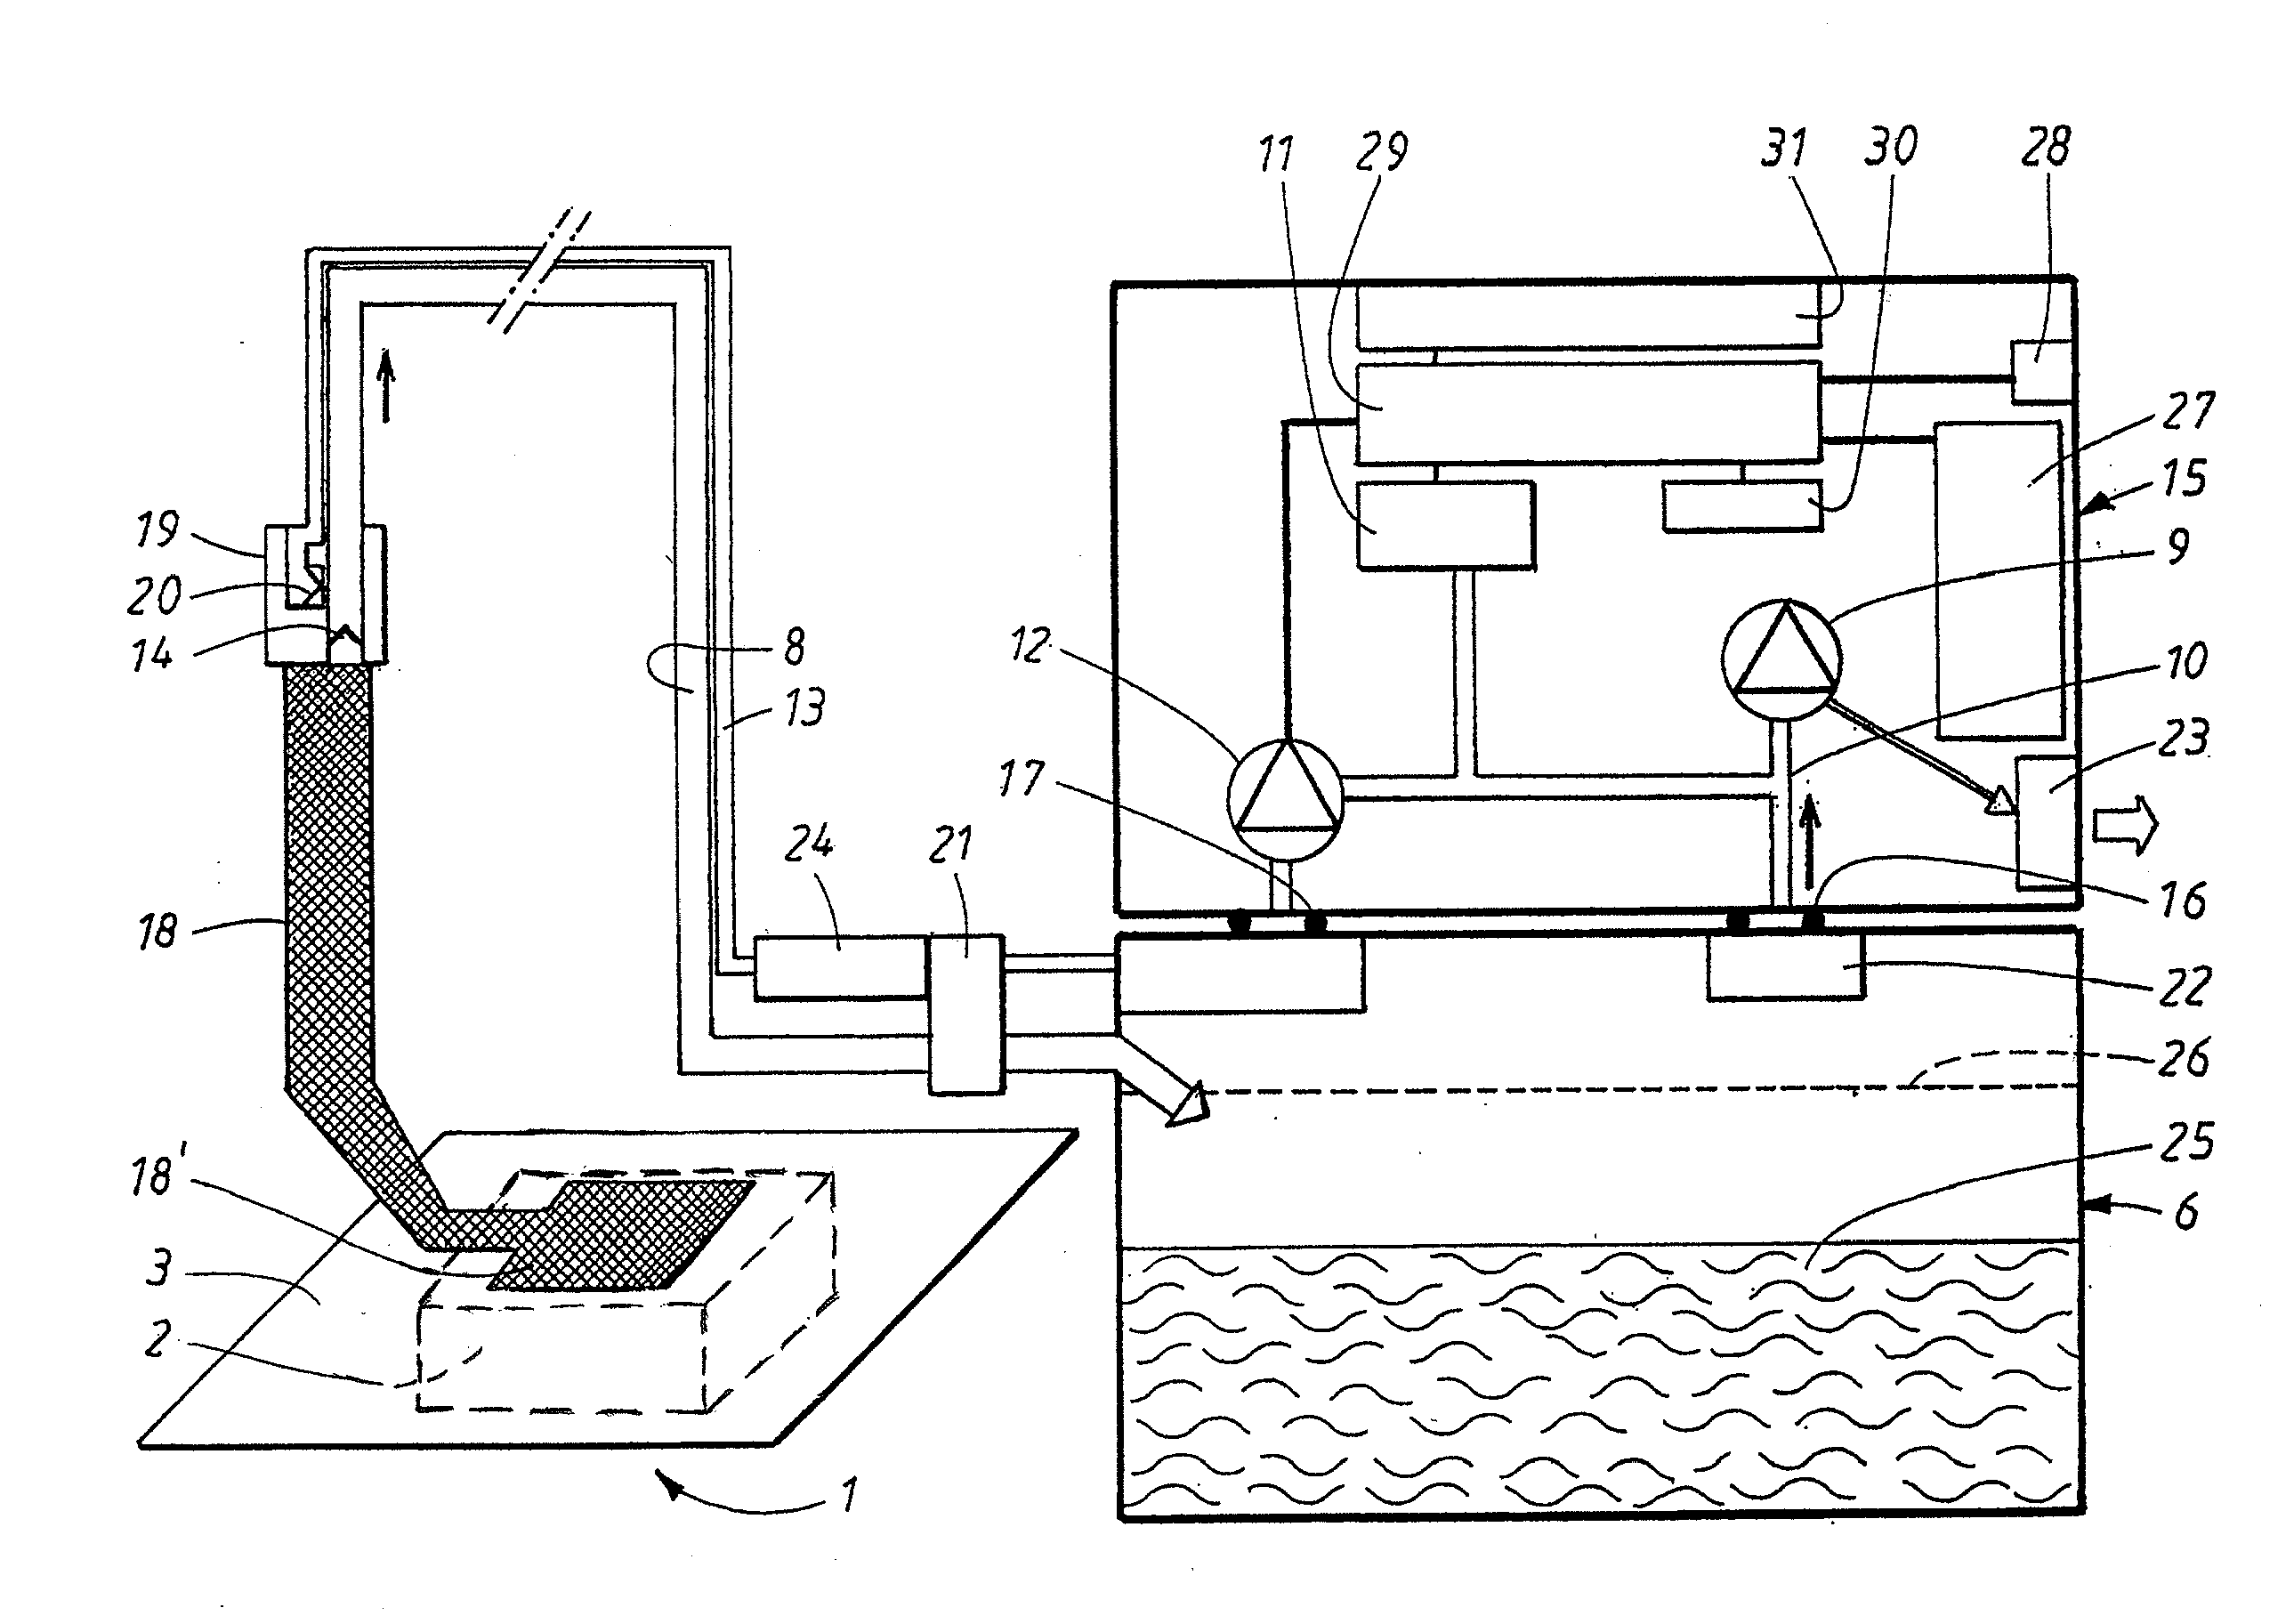 Apparatus and method for controlling the negative pressure in a wound